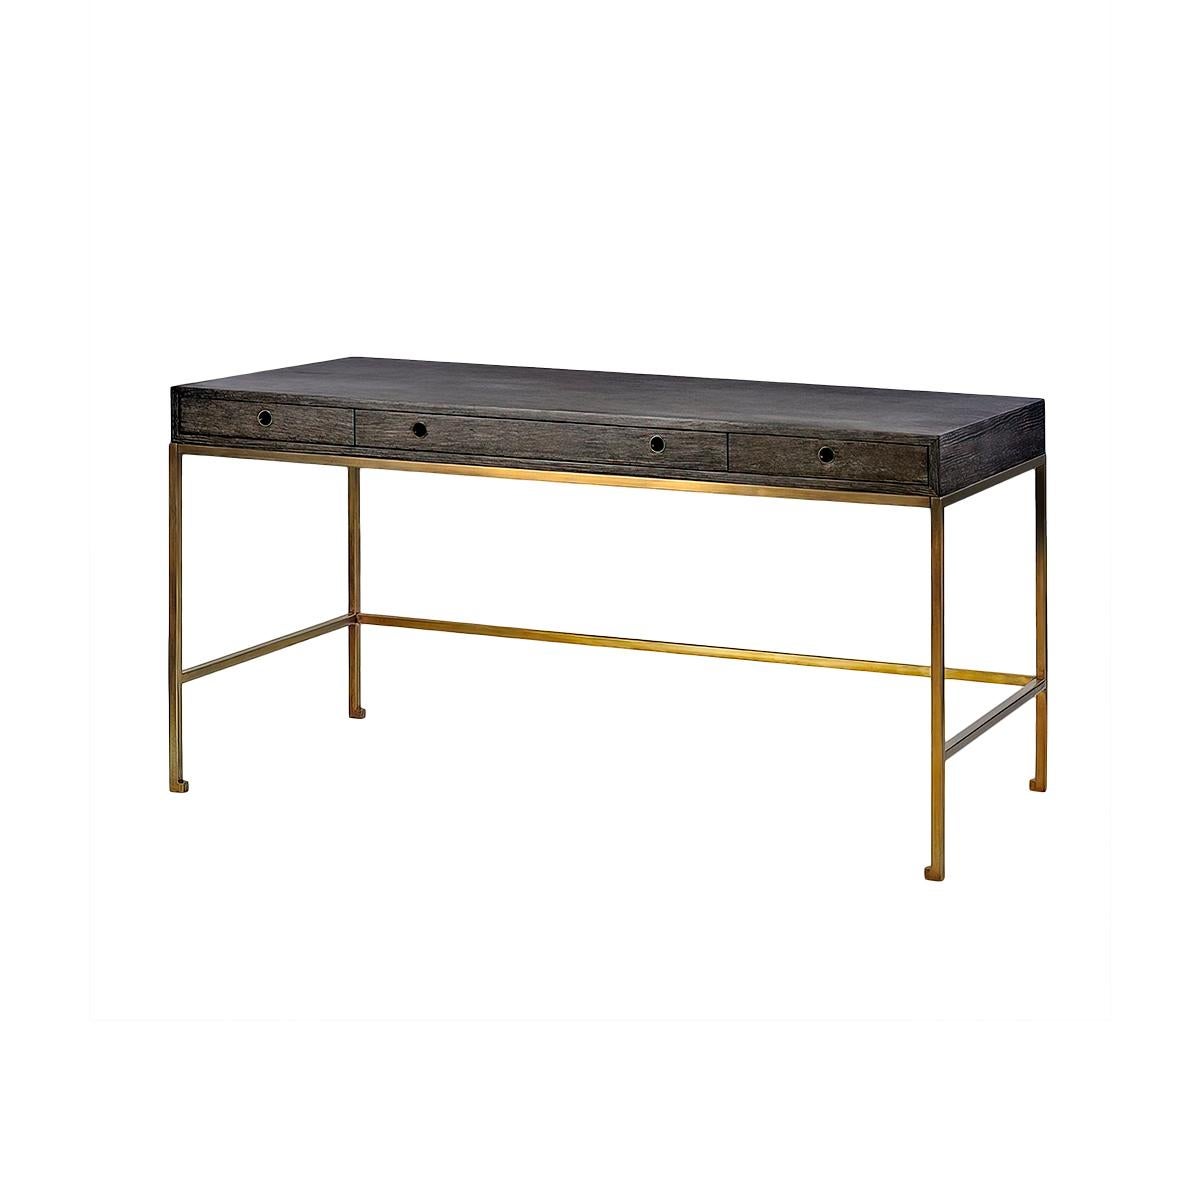 Midnight Modern Desk with a unique dark cerused greyed finish having a large flat top writing surface, three drawers with metal grommet finger pulls. Raised on a bronzed finish metal base.

Dimensions: 60